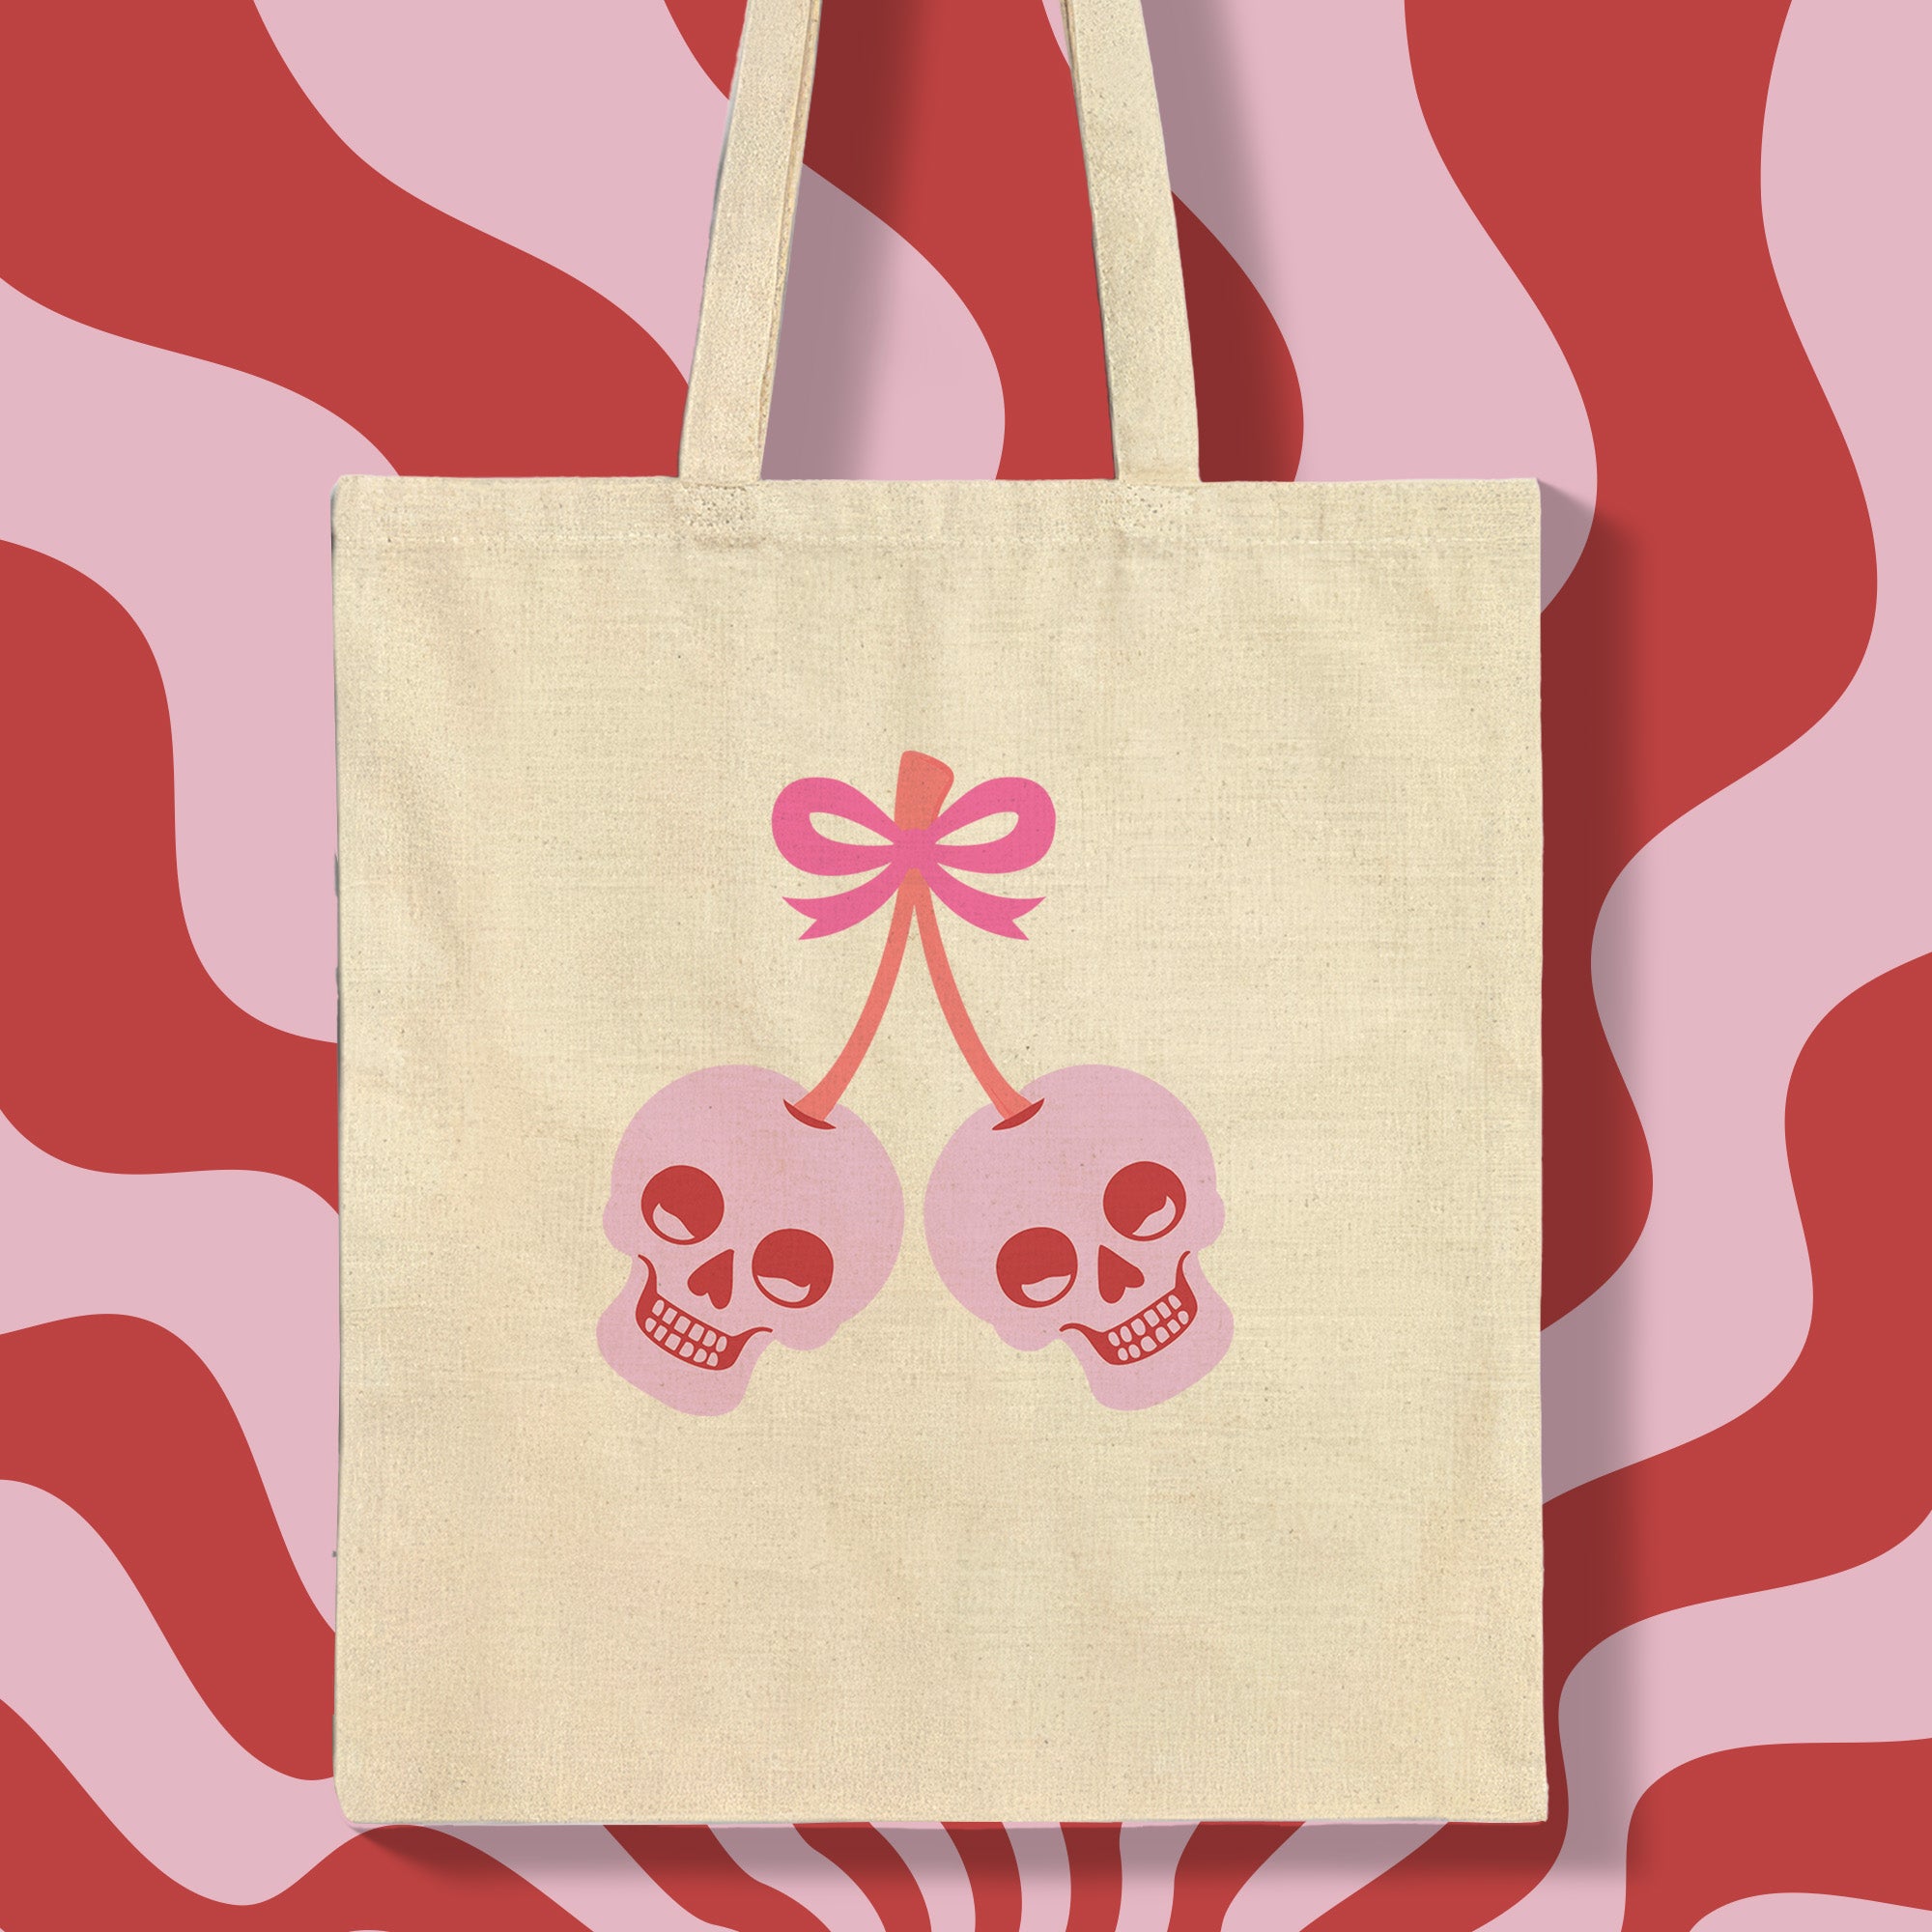 Canvas tote bag featuring pink skull cherries design. Two pink skulls connected by red stem and bow. Quirky gothic-inspired graphic on cream background. Stylish, edgy accessory for everyday use. Perfect for alternative fashion lovers.